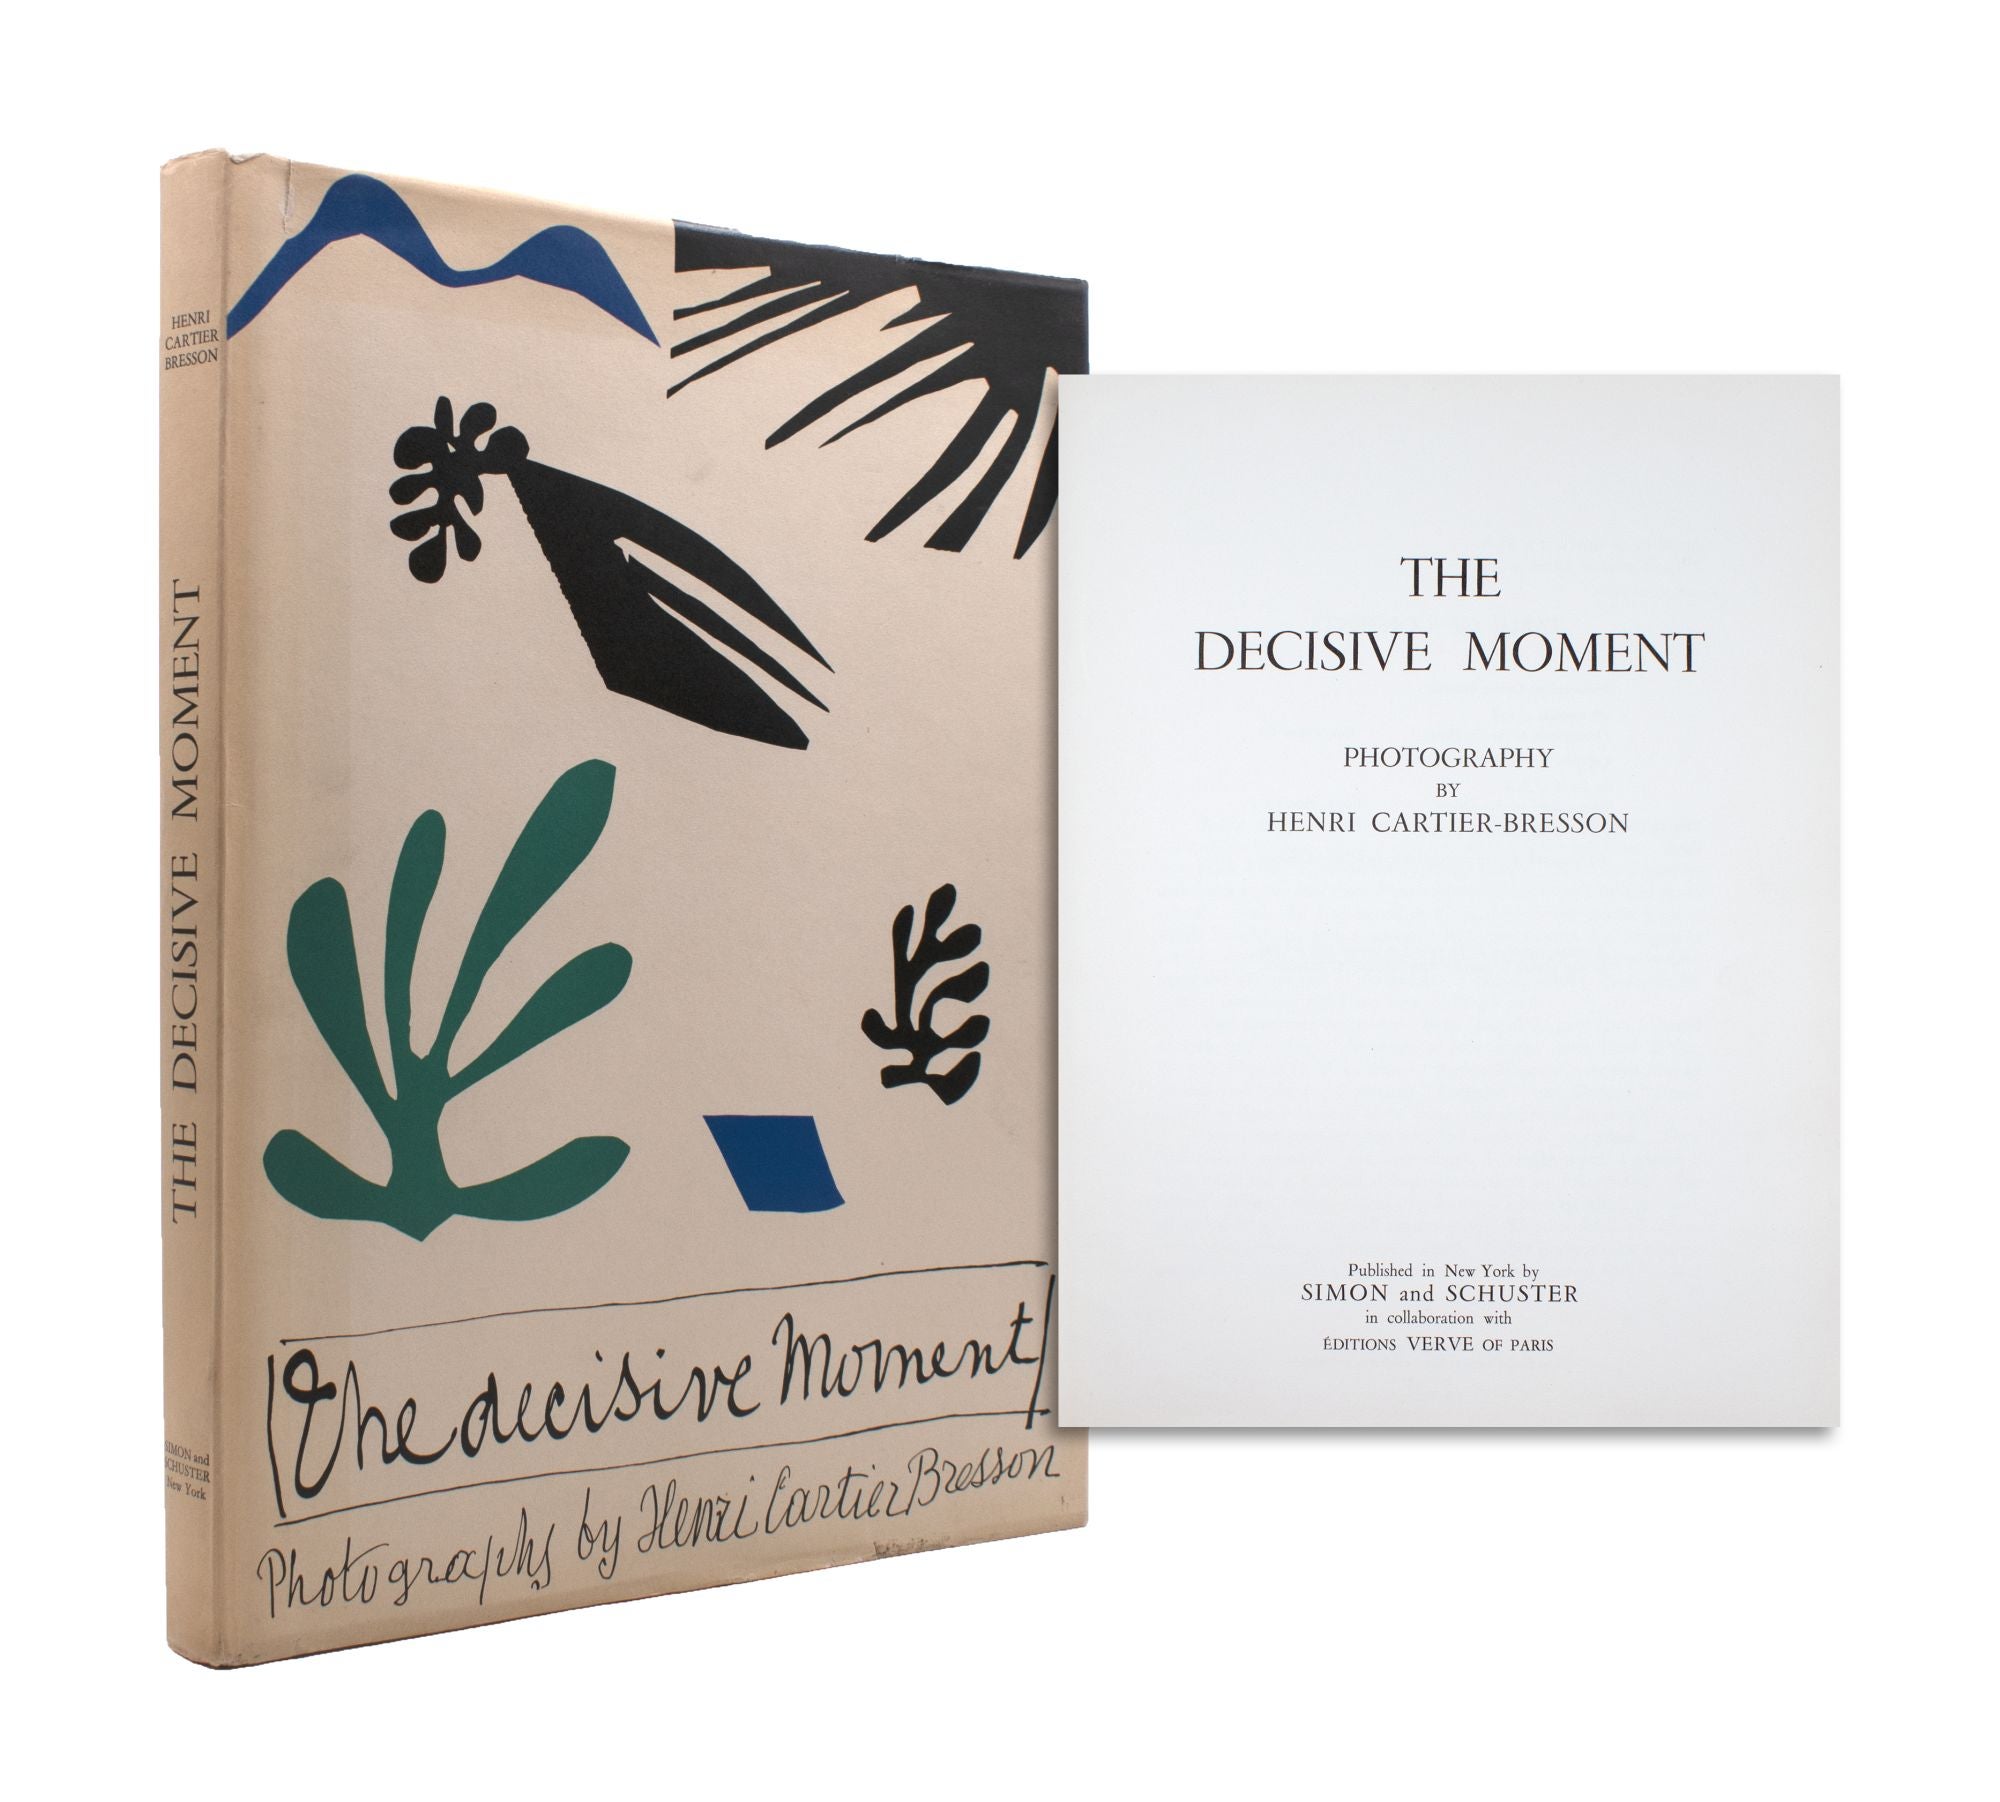 The Decisive Moment by Henri Cartier-Bresson on James Cummins Bookseller